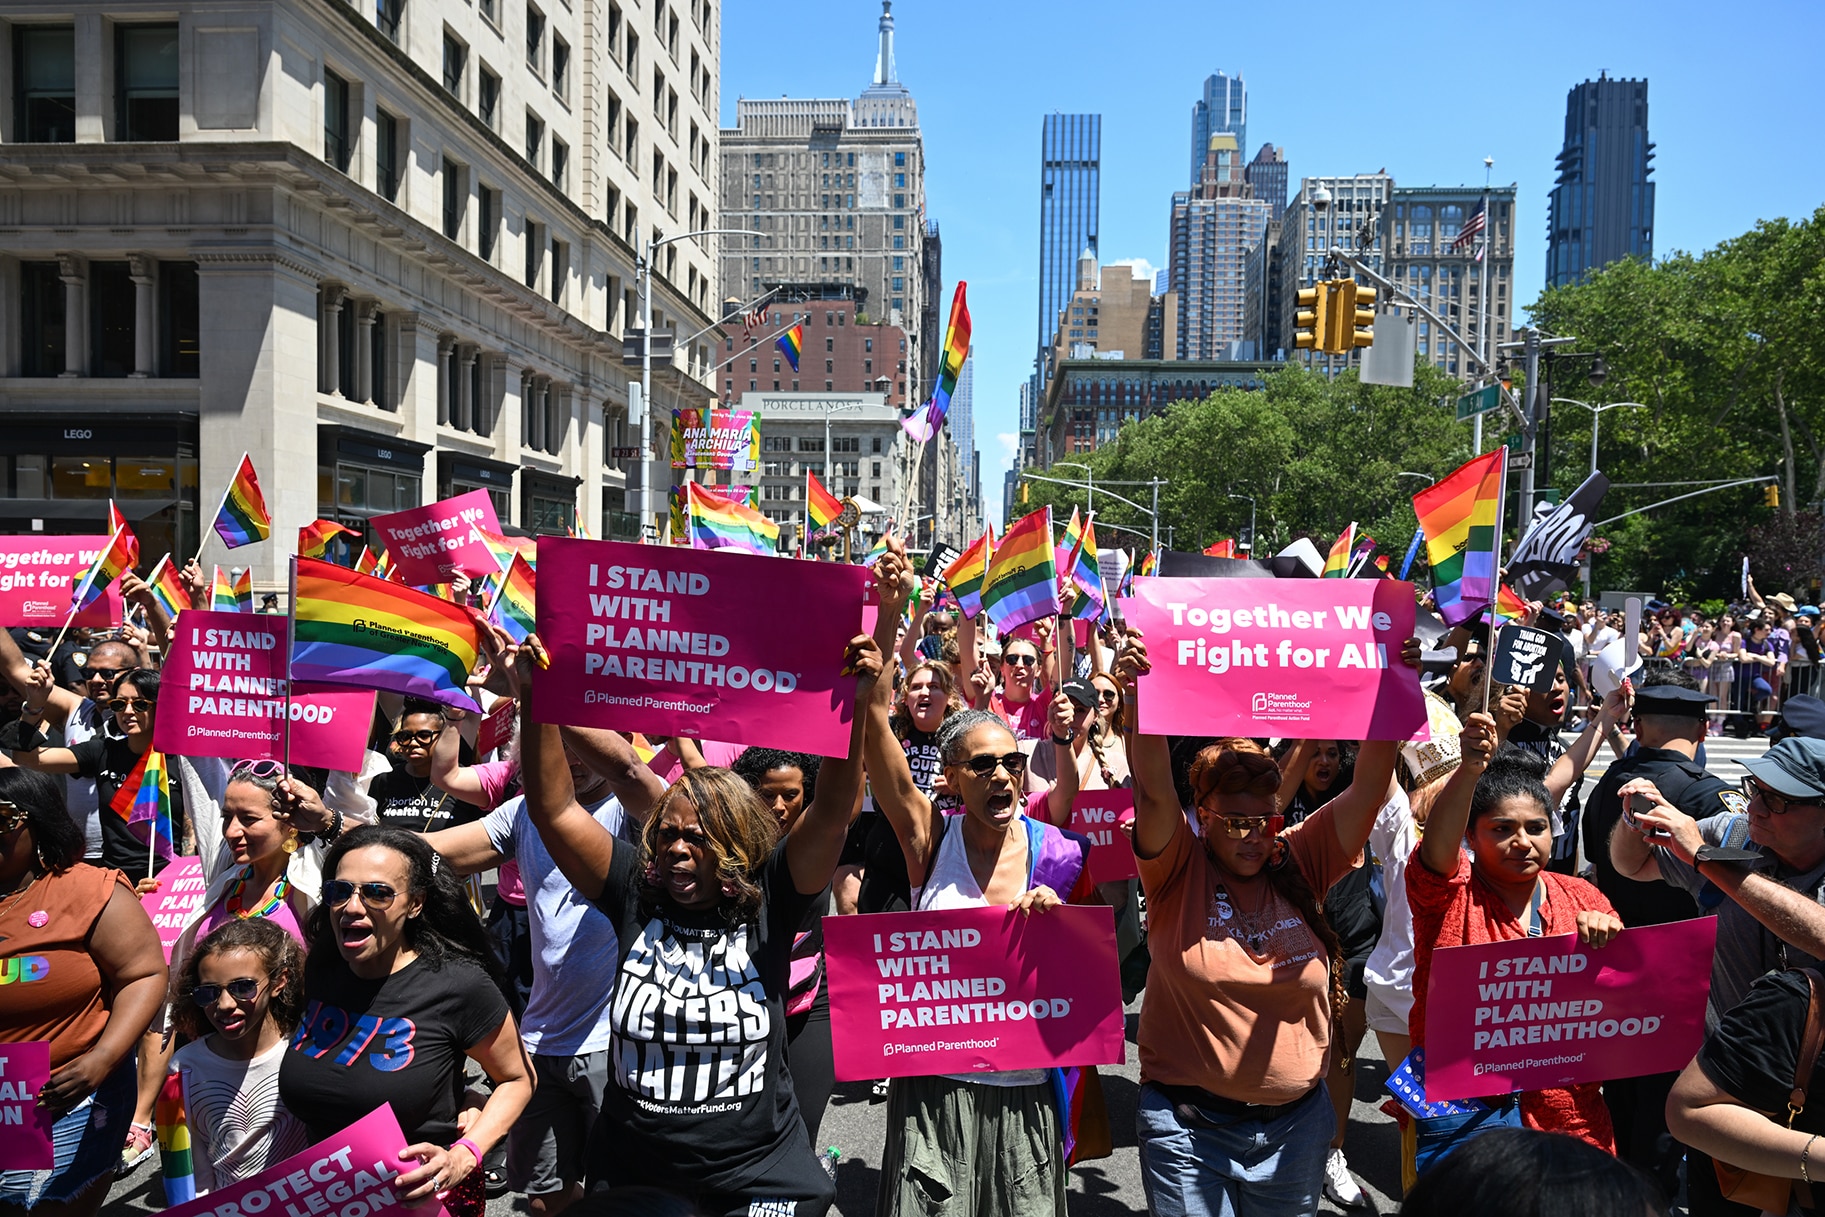 Planned Parenthood leads the New York City Pride Parade